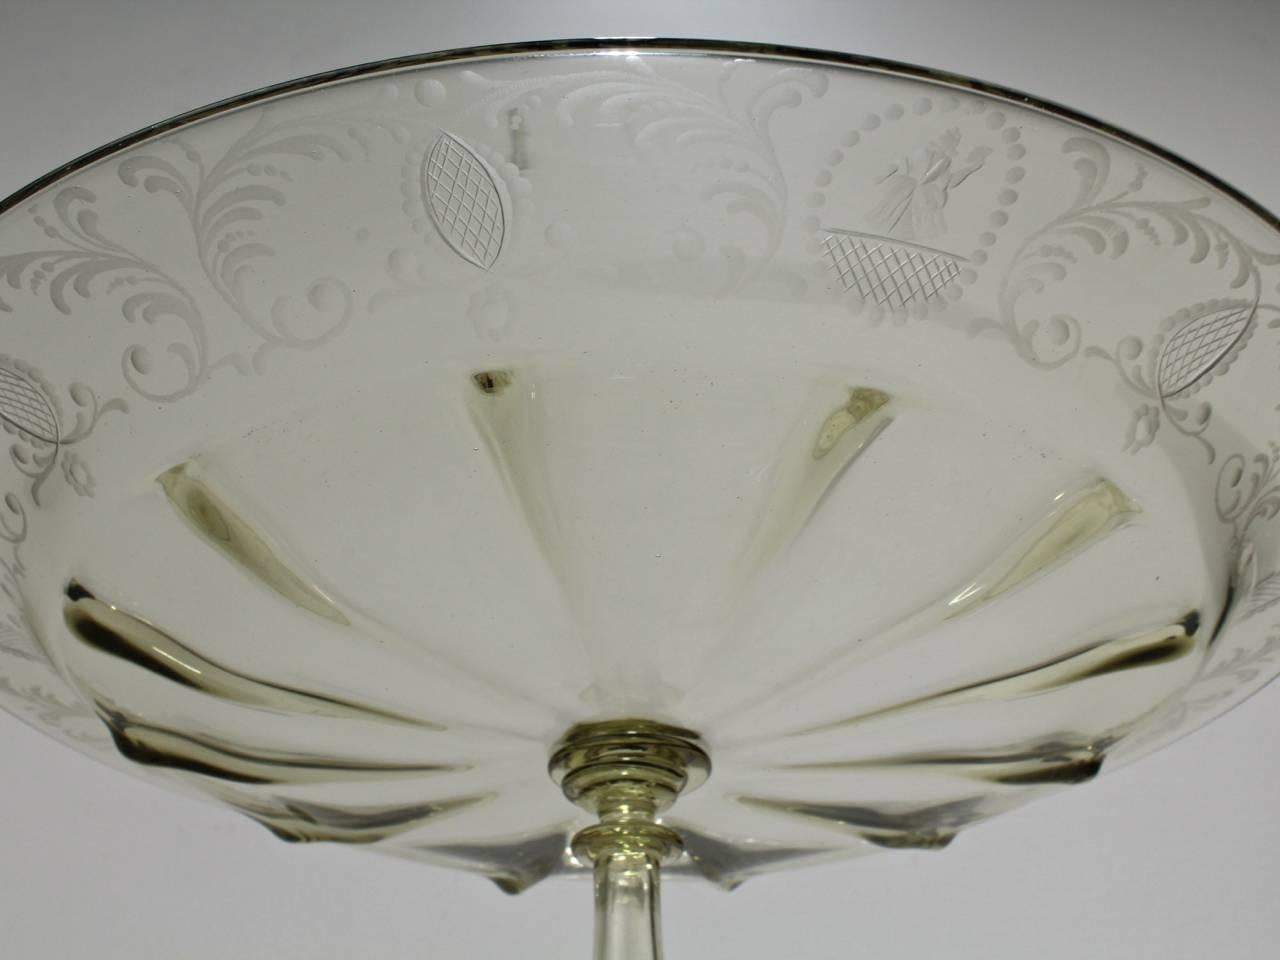 Renaissance Pauly & Co. Light Amber Etched Venetian Glass Compote or Cake Stand